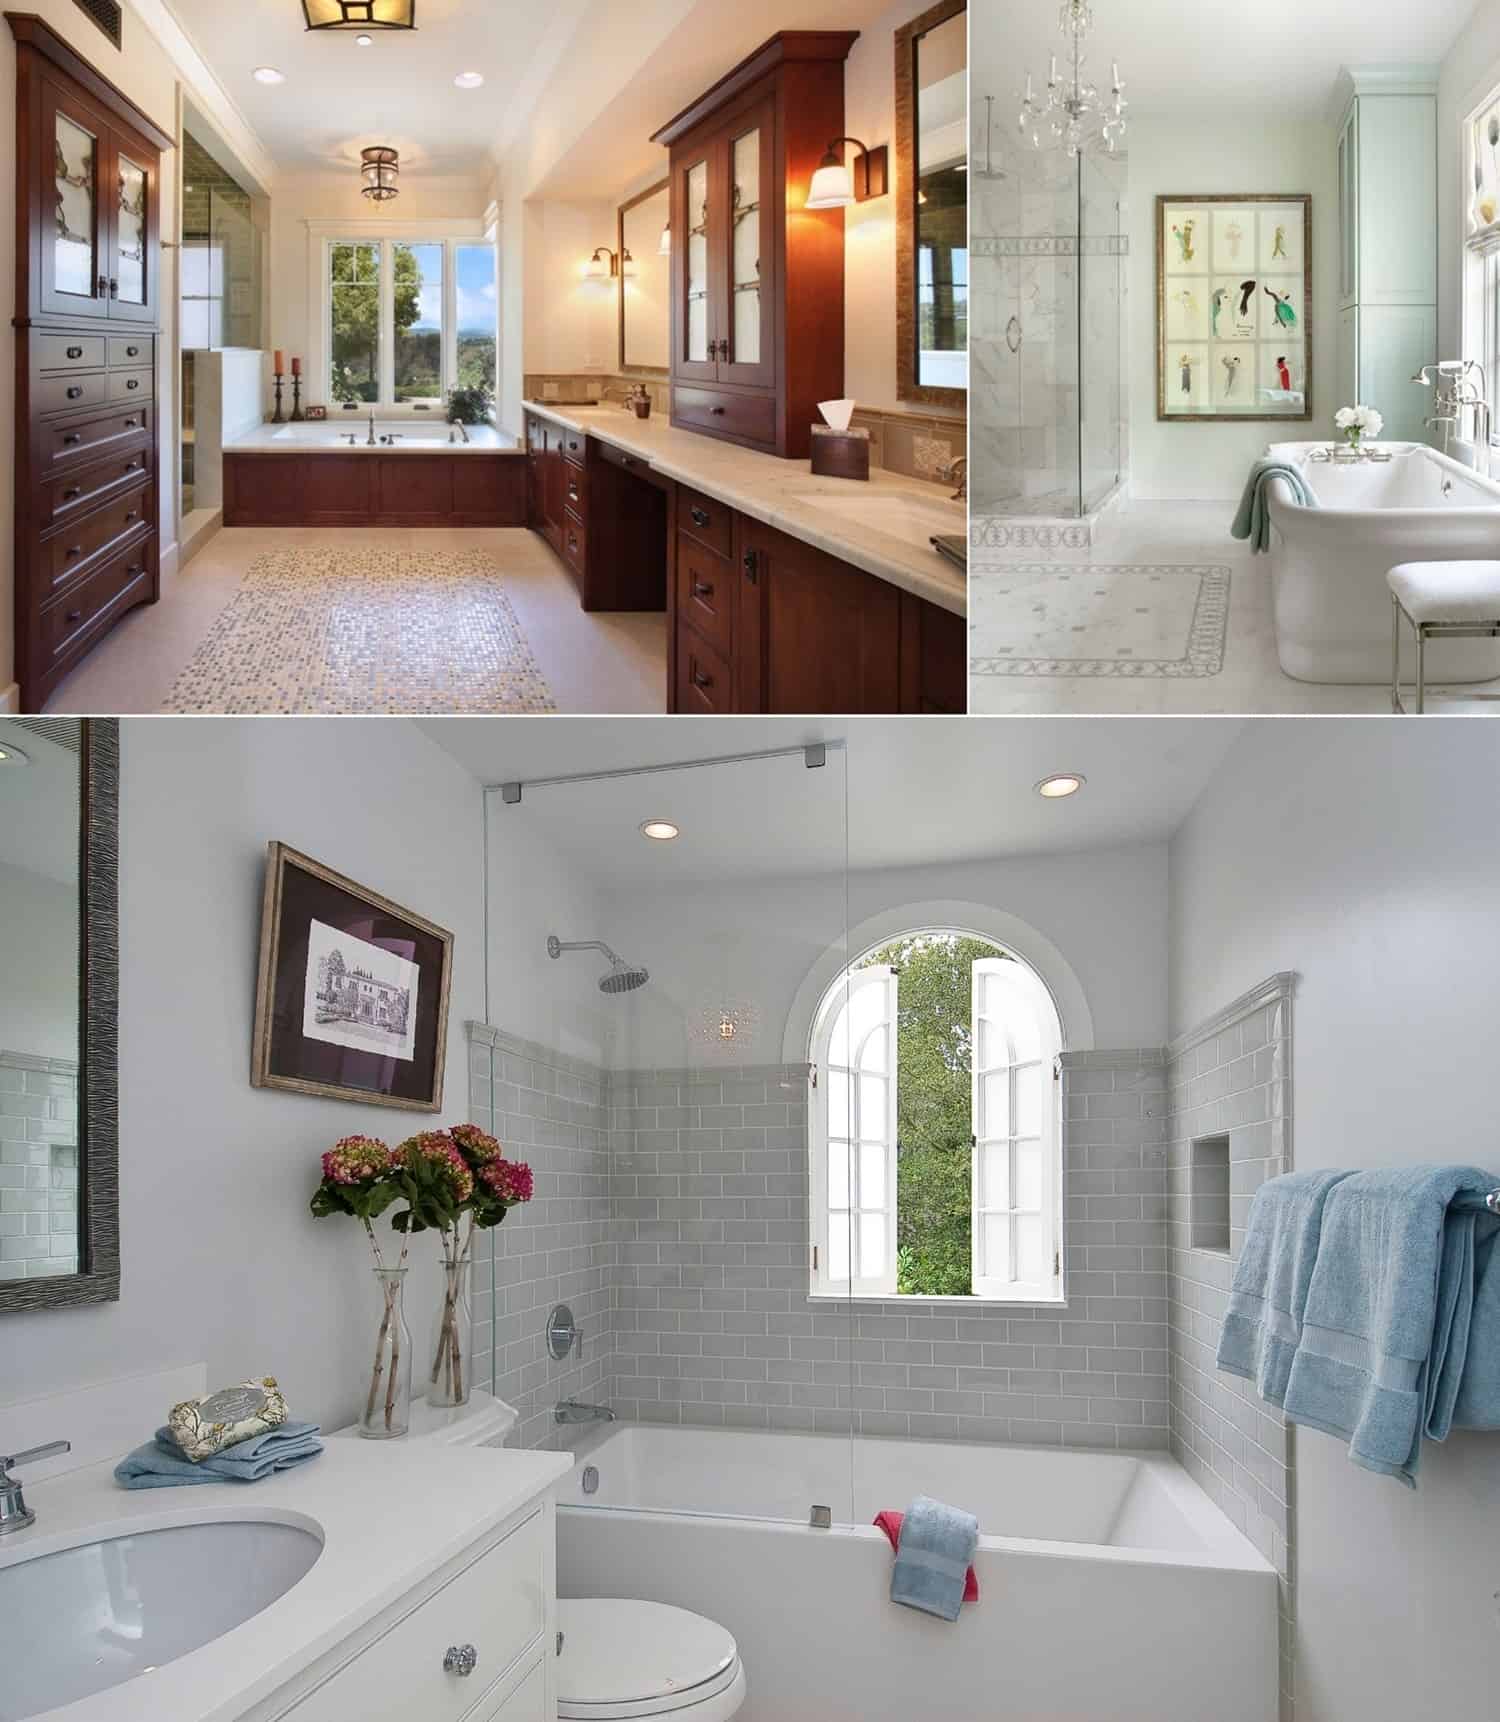 CHOOSE THE RIGHT TYPE OF A BATHTUB